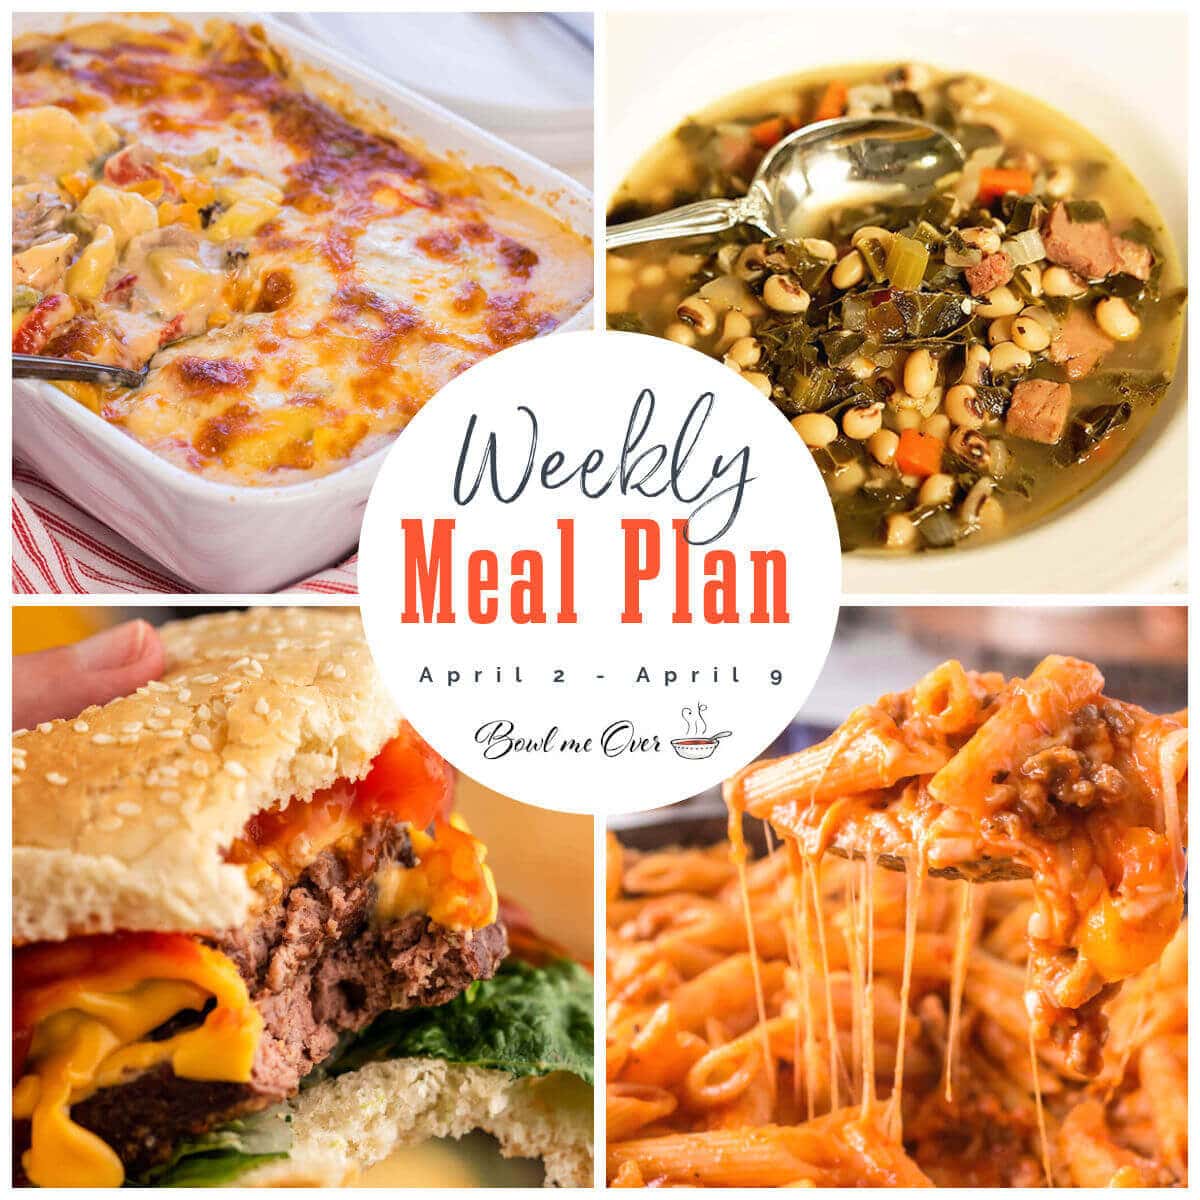 Weekly Meal Plan 14 with print overlay.